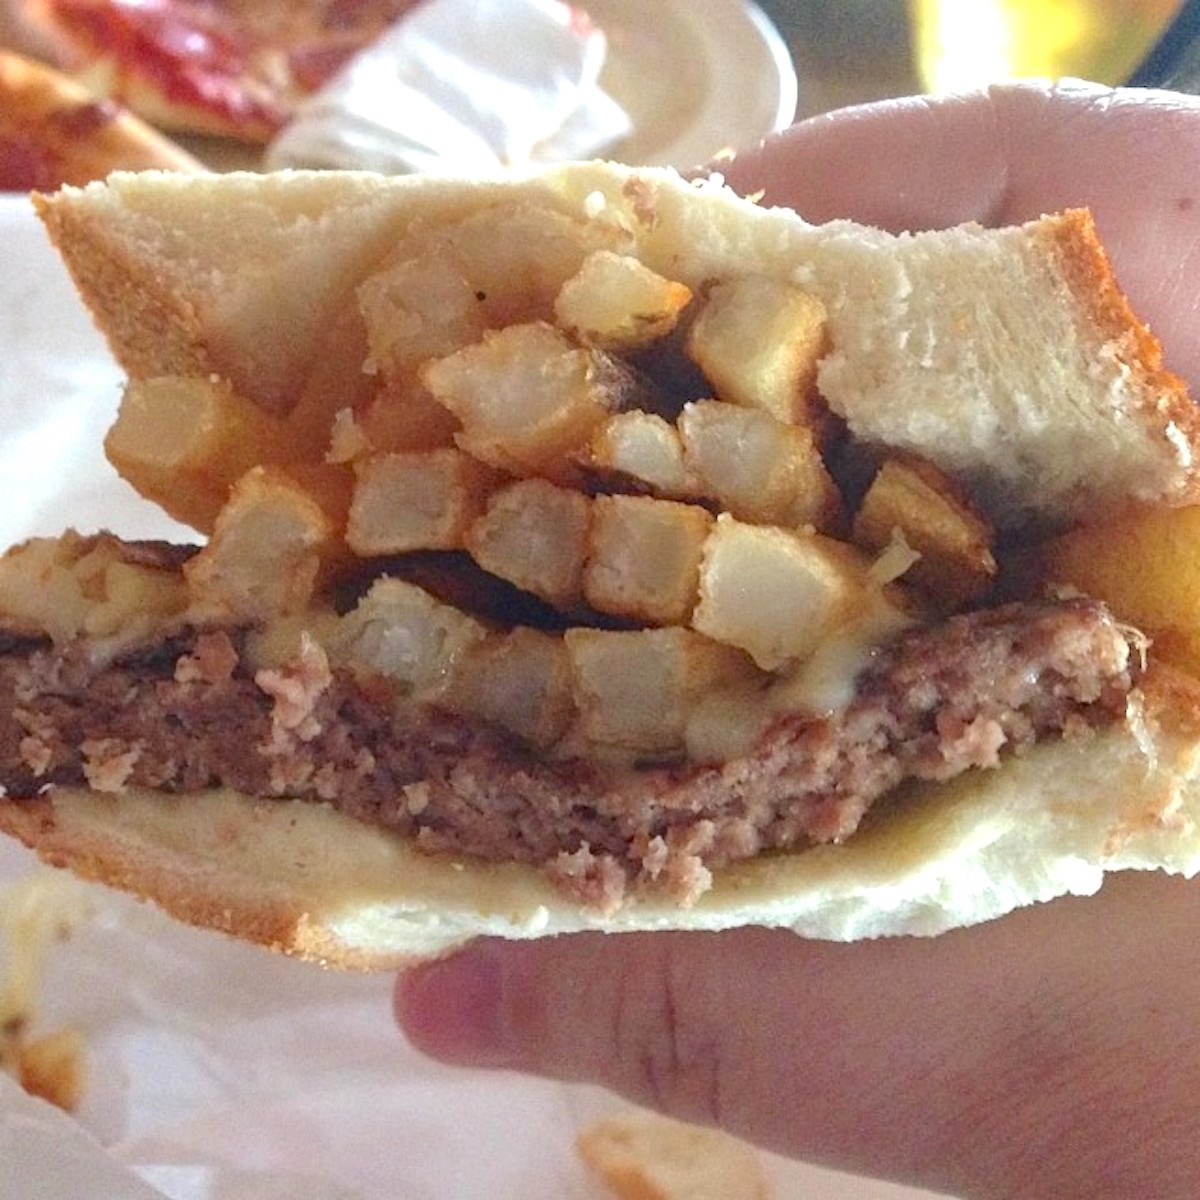 The Pitts-Burger from Primanti Brothers in Wilton Manors, Florida